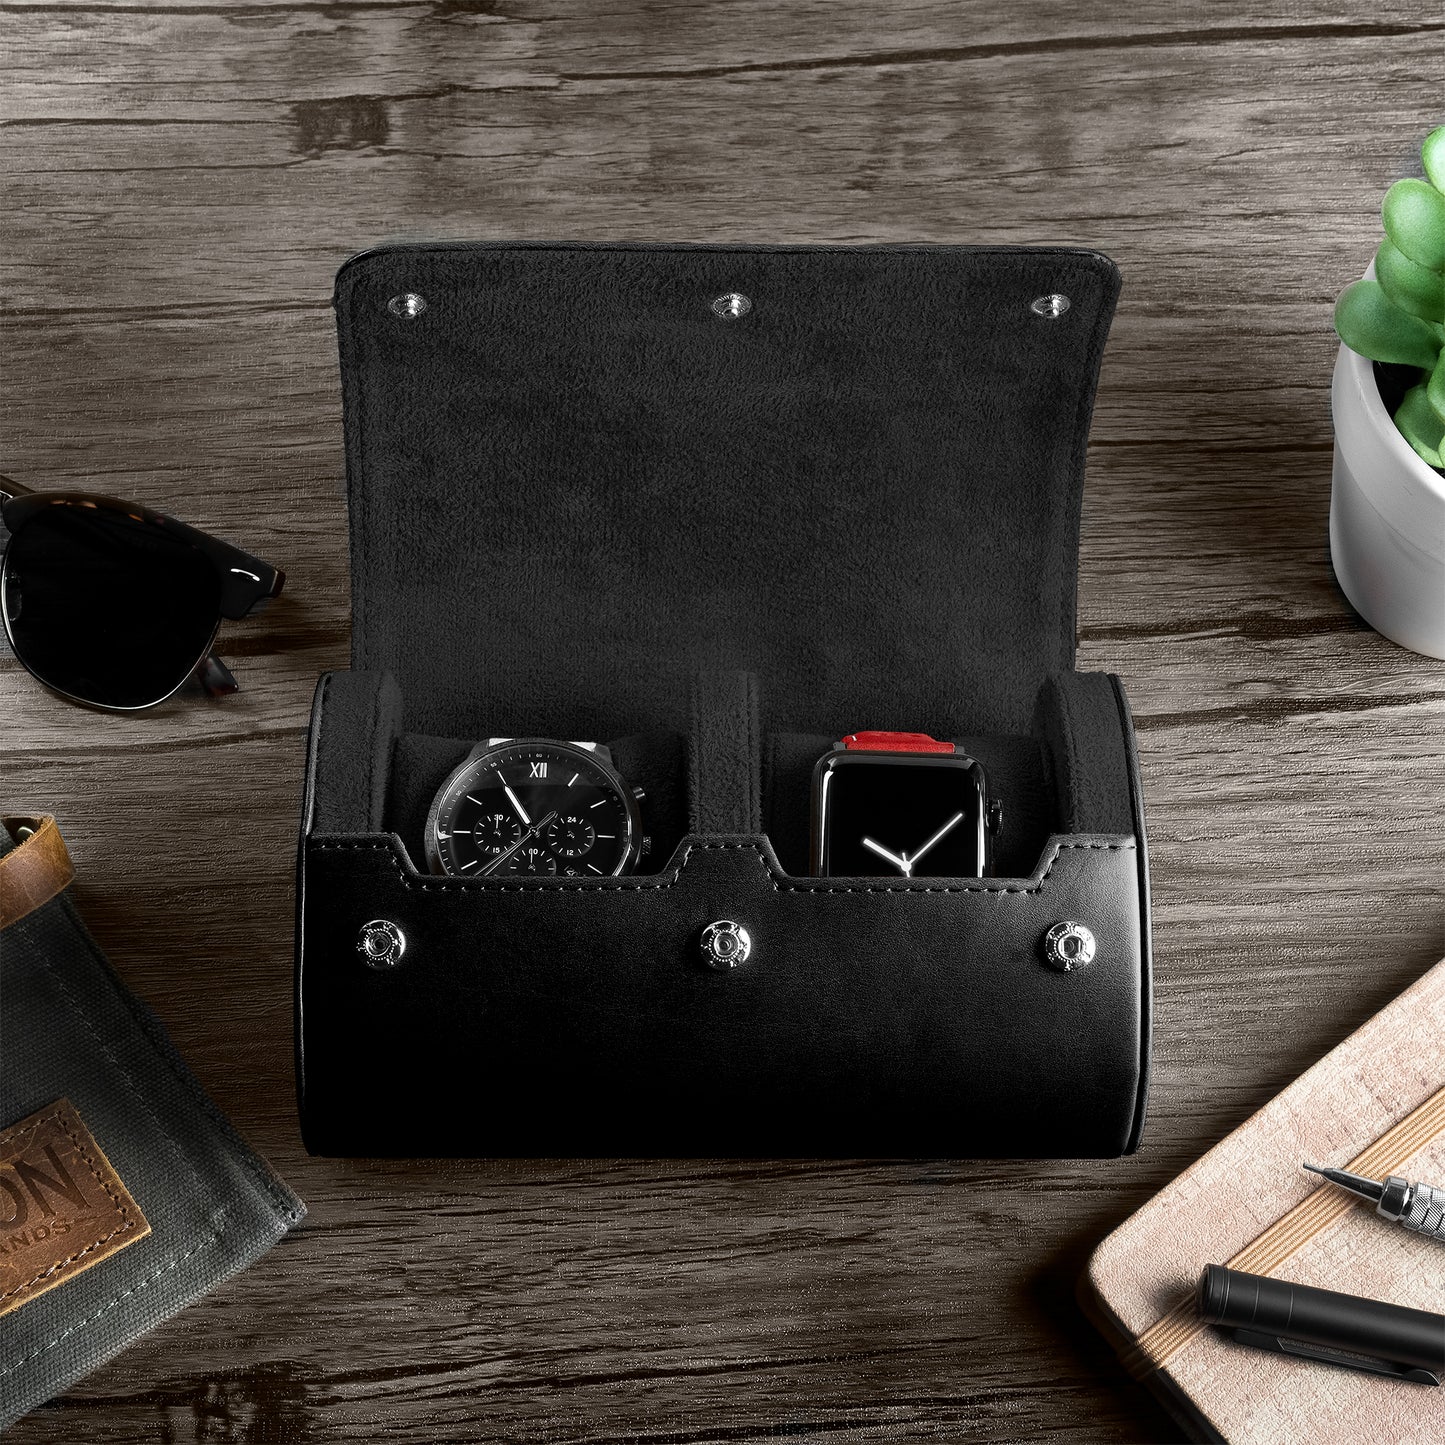 Double Recycled Leather Watch Roll Travel Case